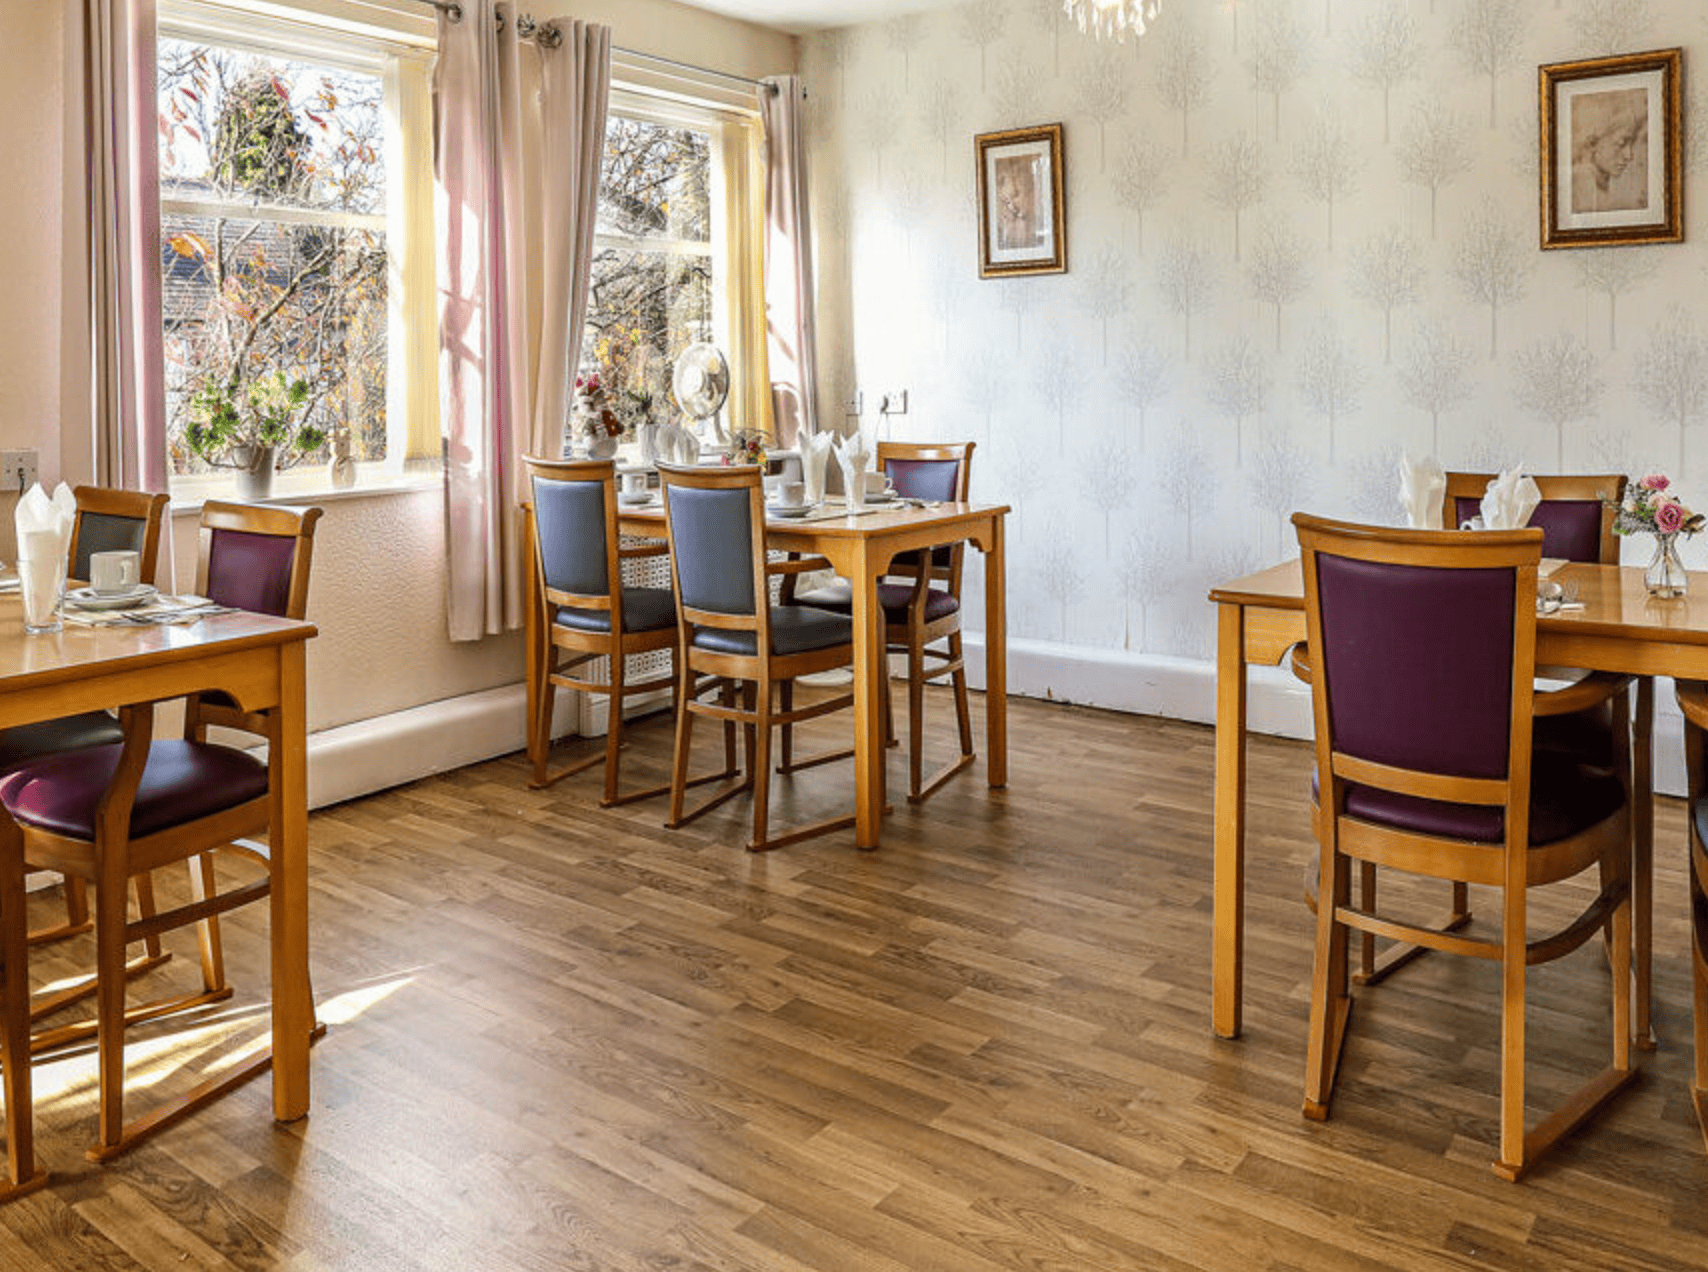 Dining room of The Hawthorns Care Home in Wilmslow, Cheshire East